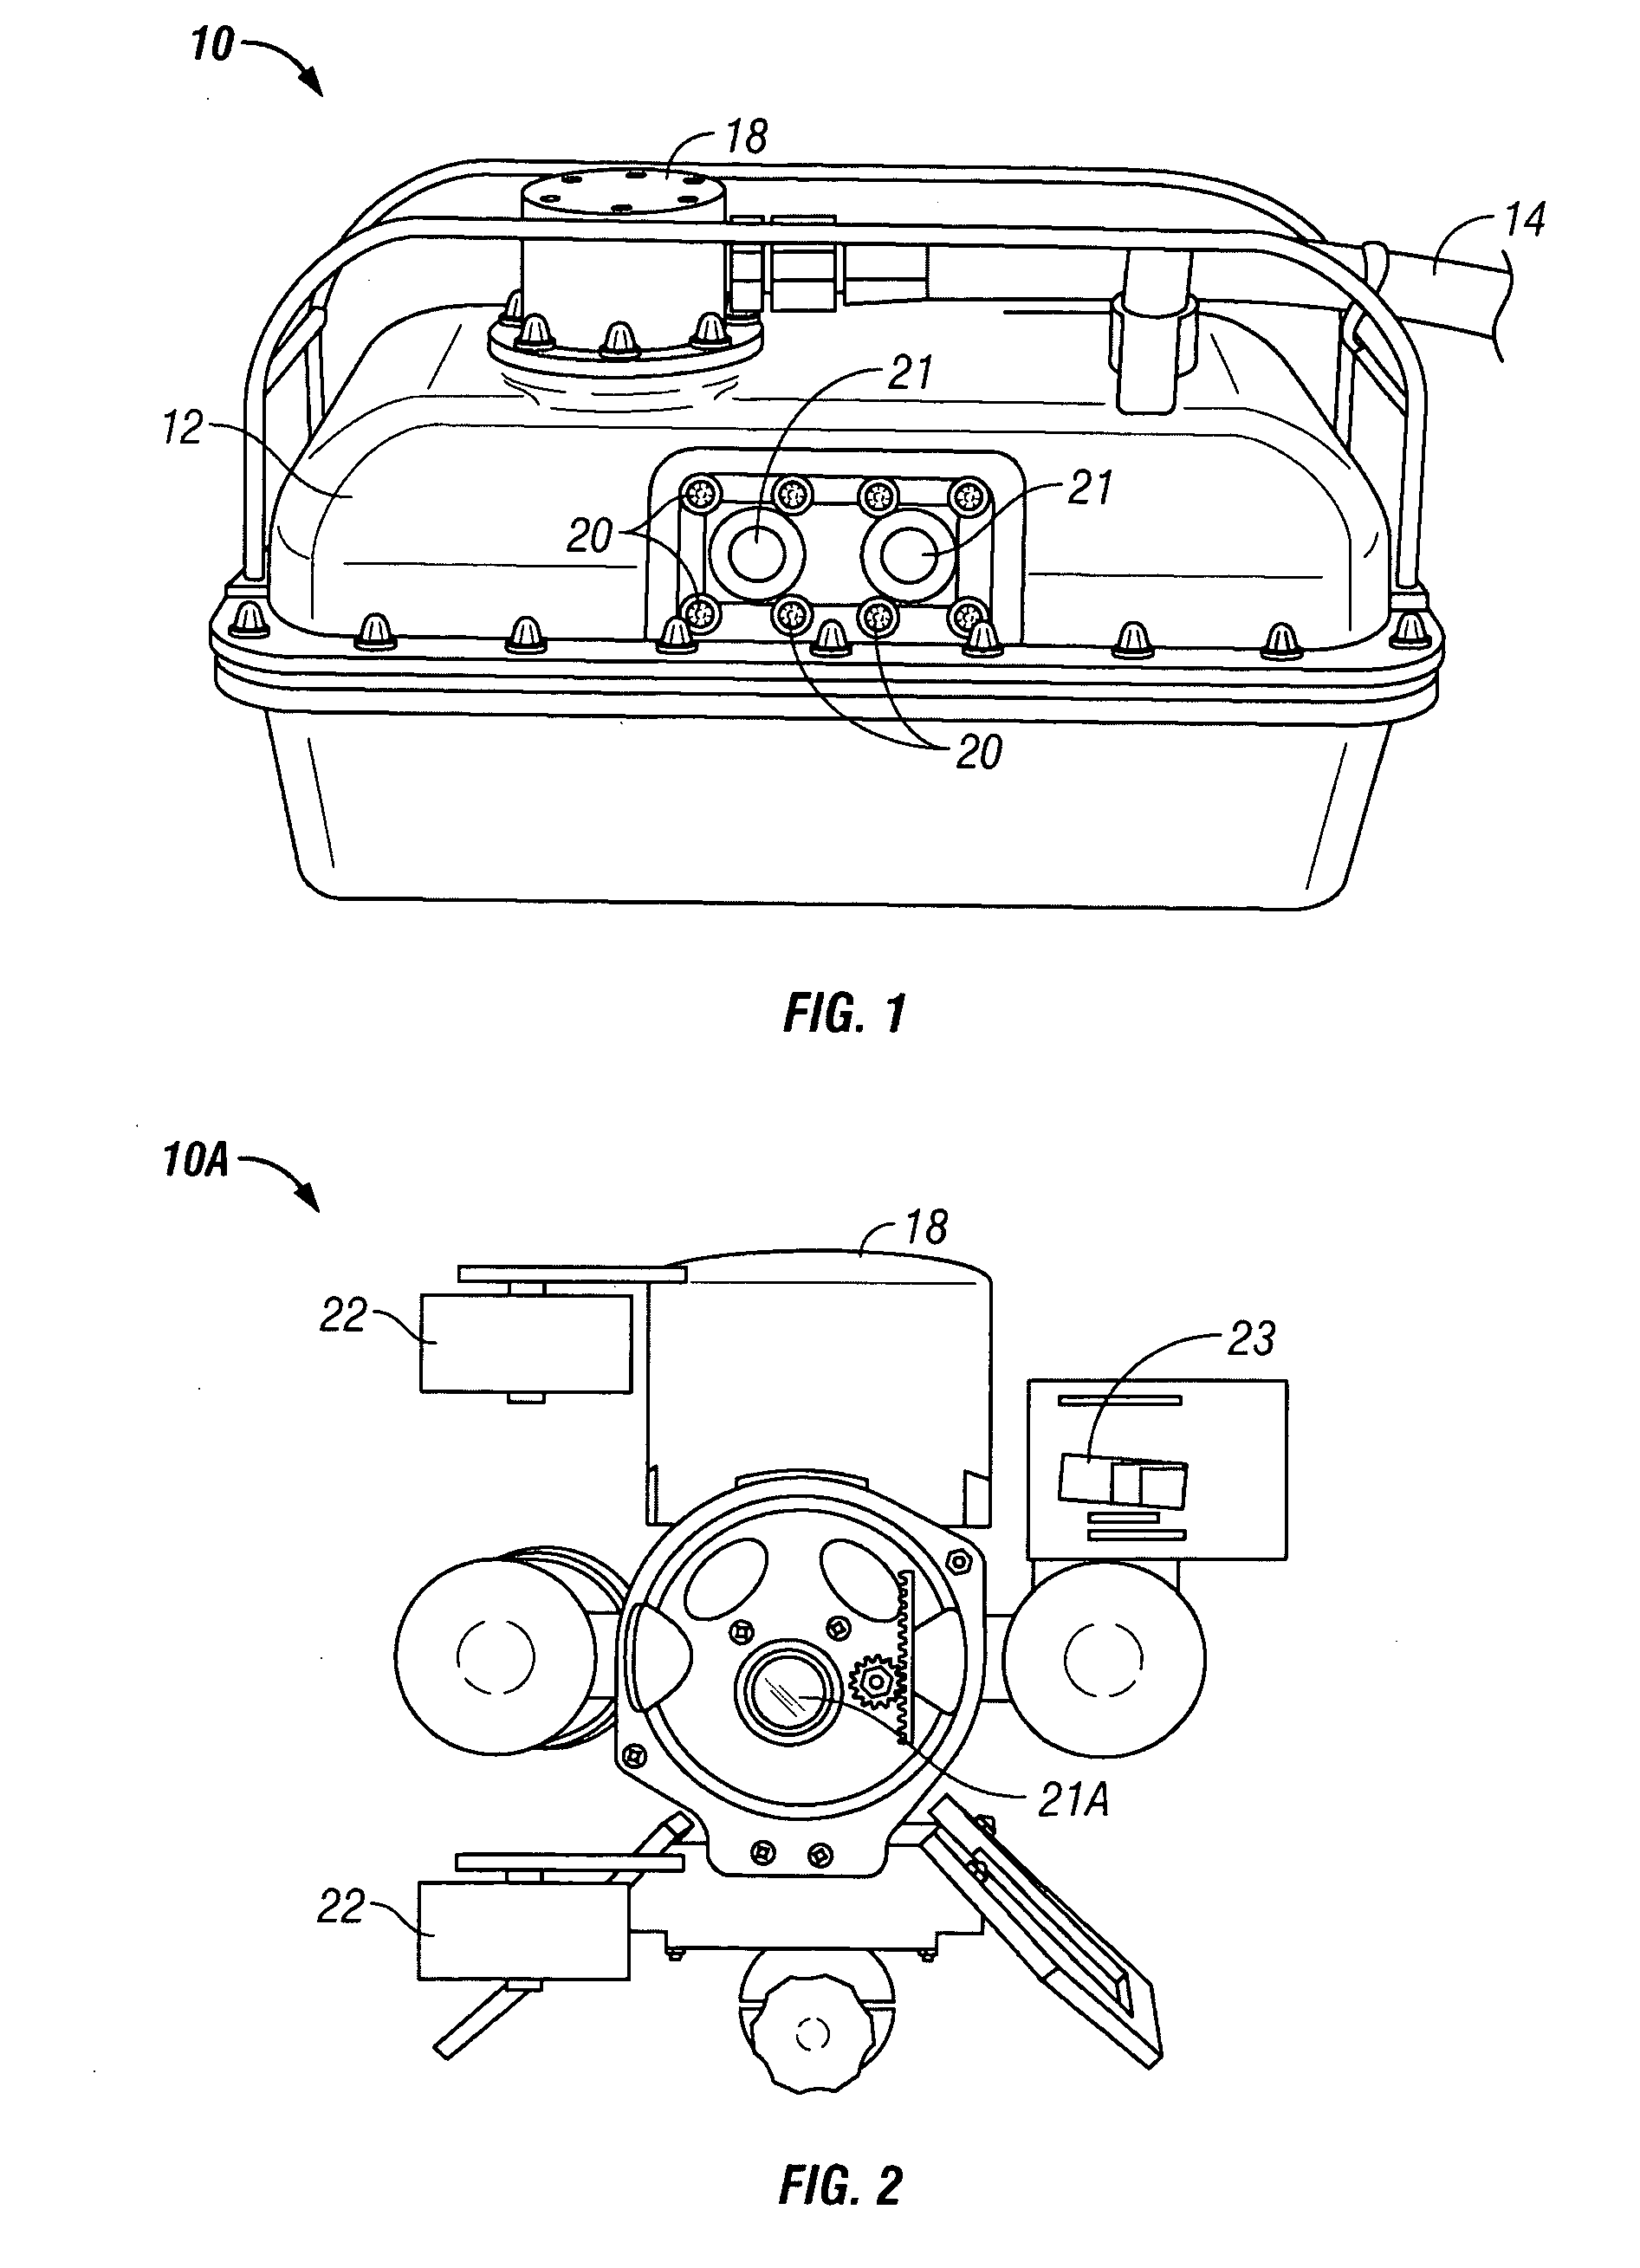 Methods for inspecting atmospheric storage tanks above ground and in floating vessels